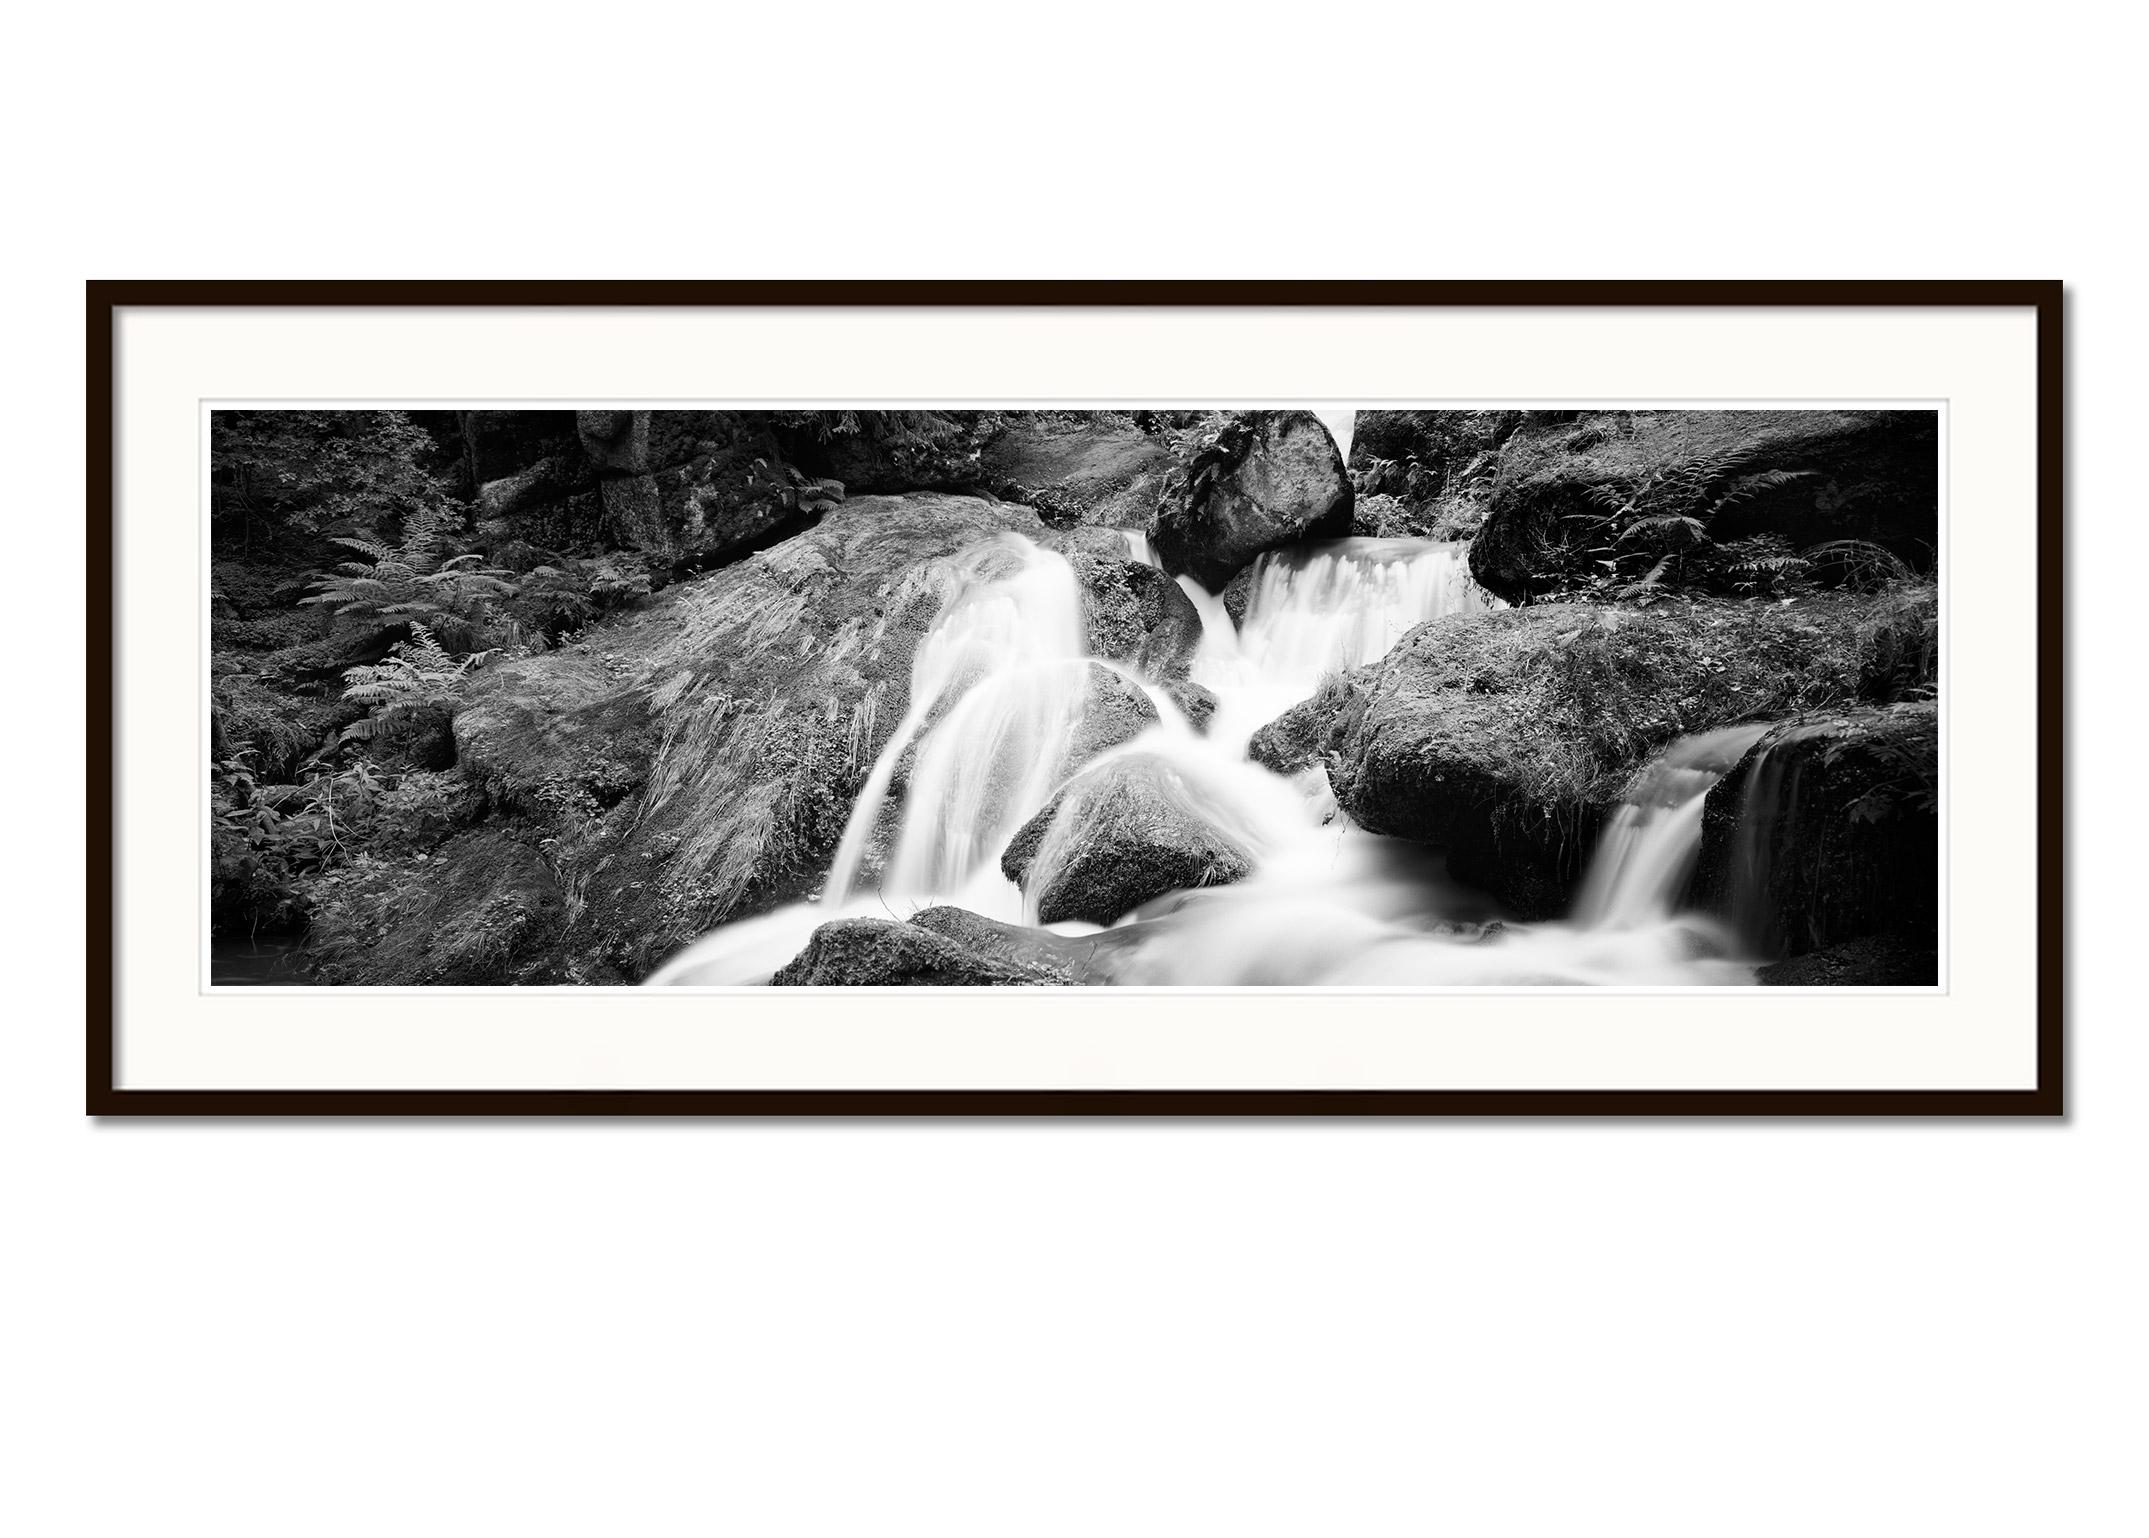 Mountain Stream, Panorama, Austria, minimalist black and white art waterscape - Black Landscape Photograph by Gerald Berghammer